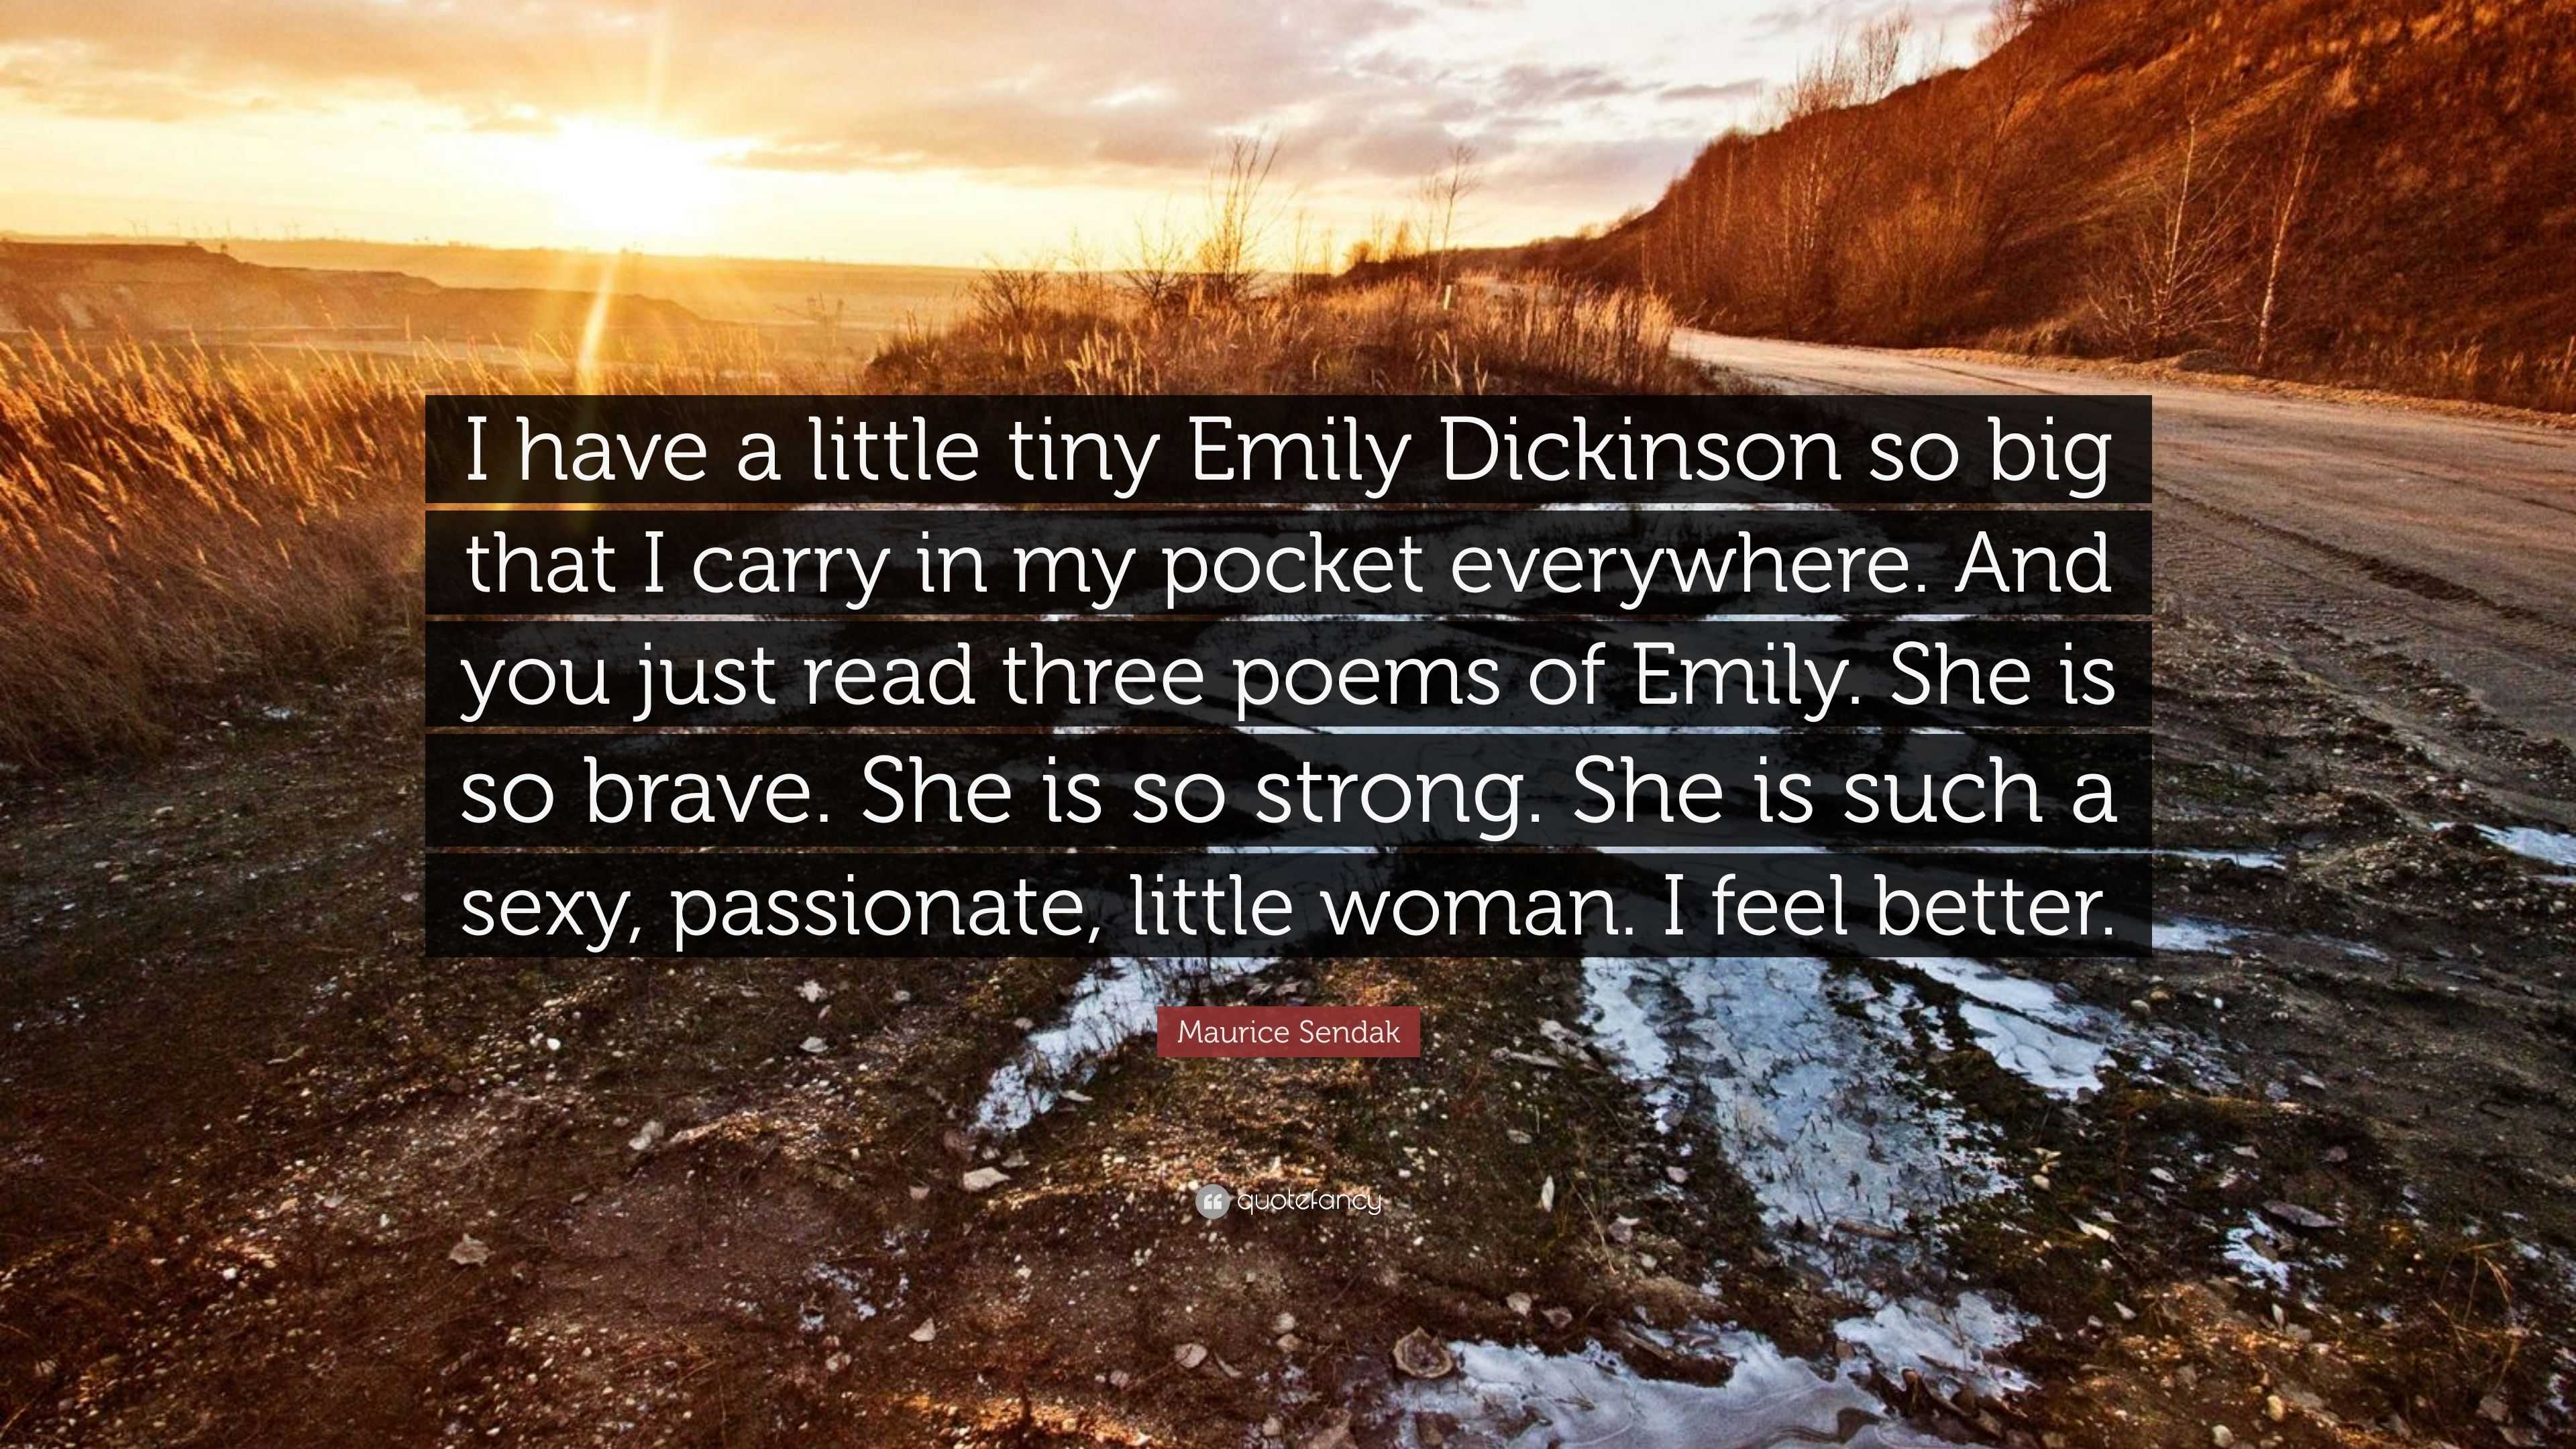 Maurice Sendak Quote: “I have a little tiny Emily Dickinson so big that I  carry in my pocket everywhere. And you just read three poems of Emily...”